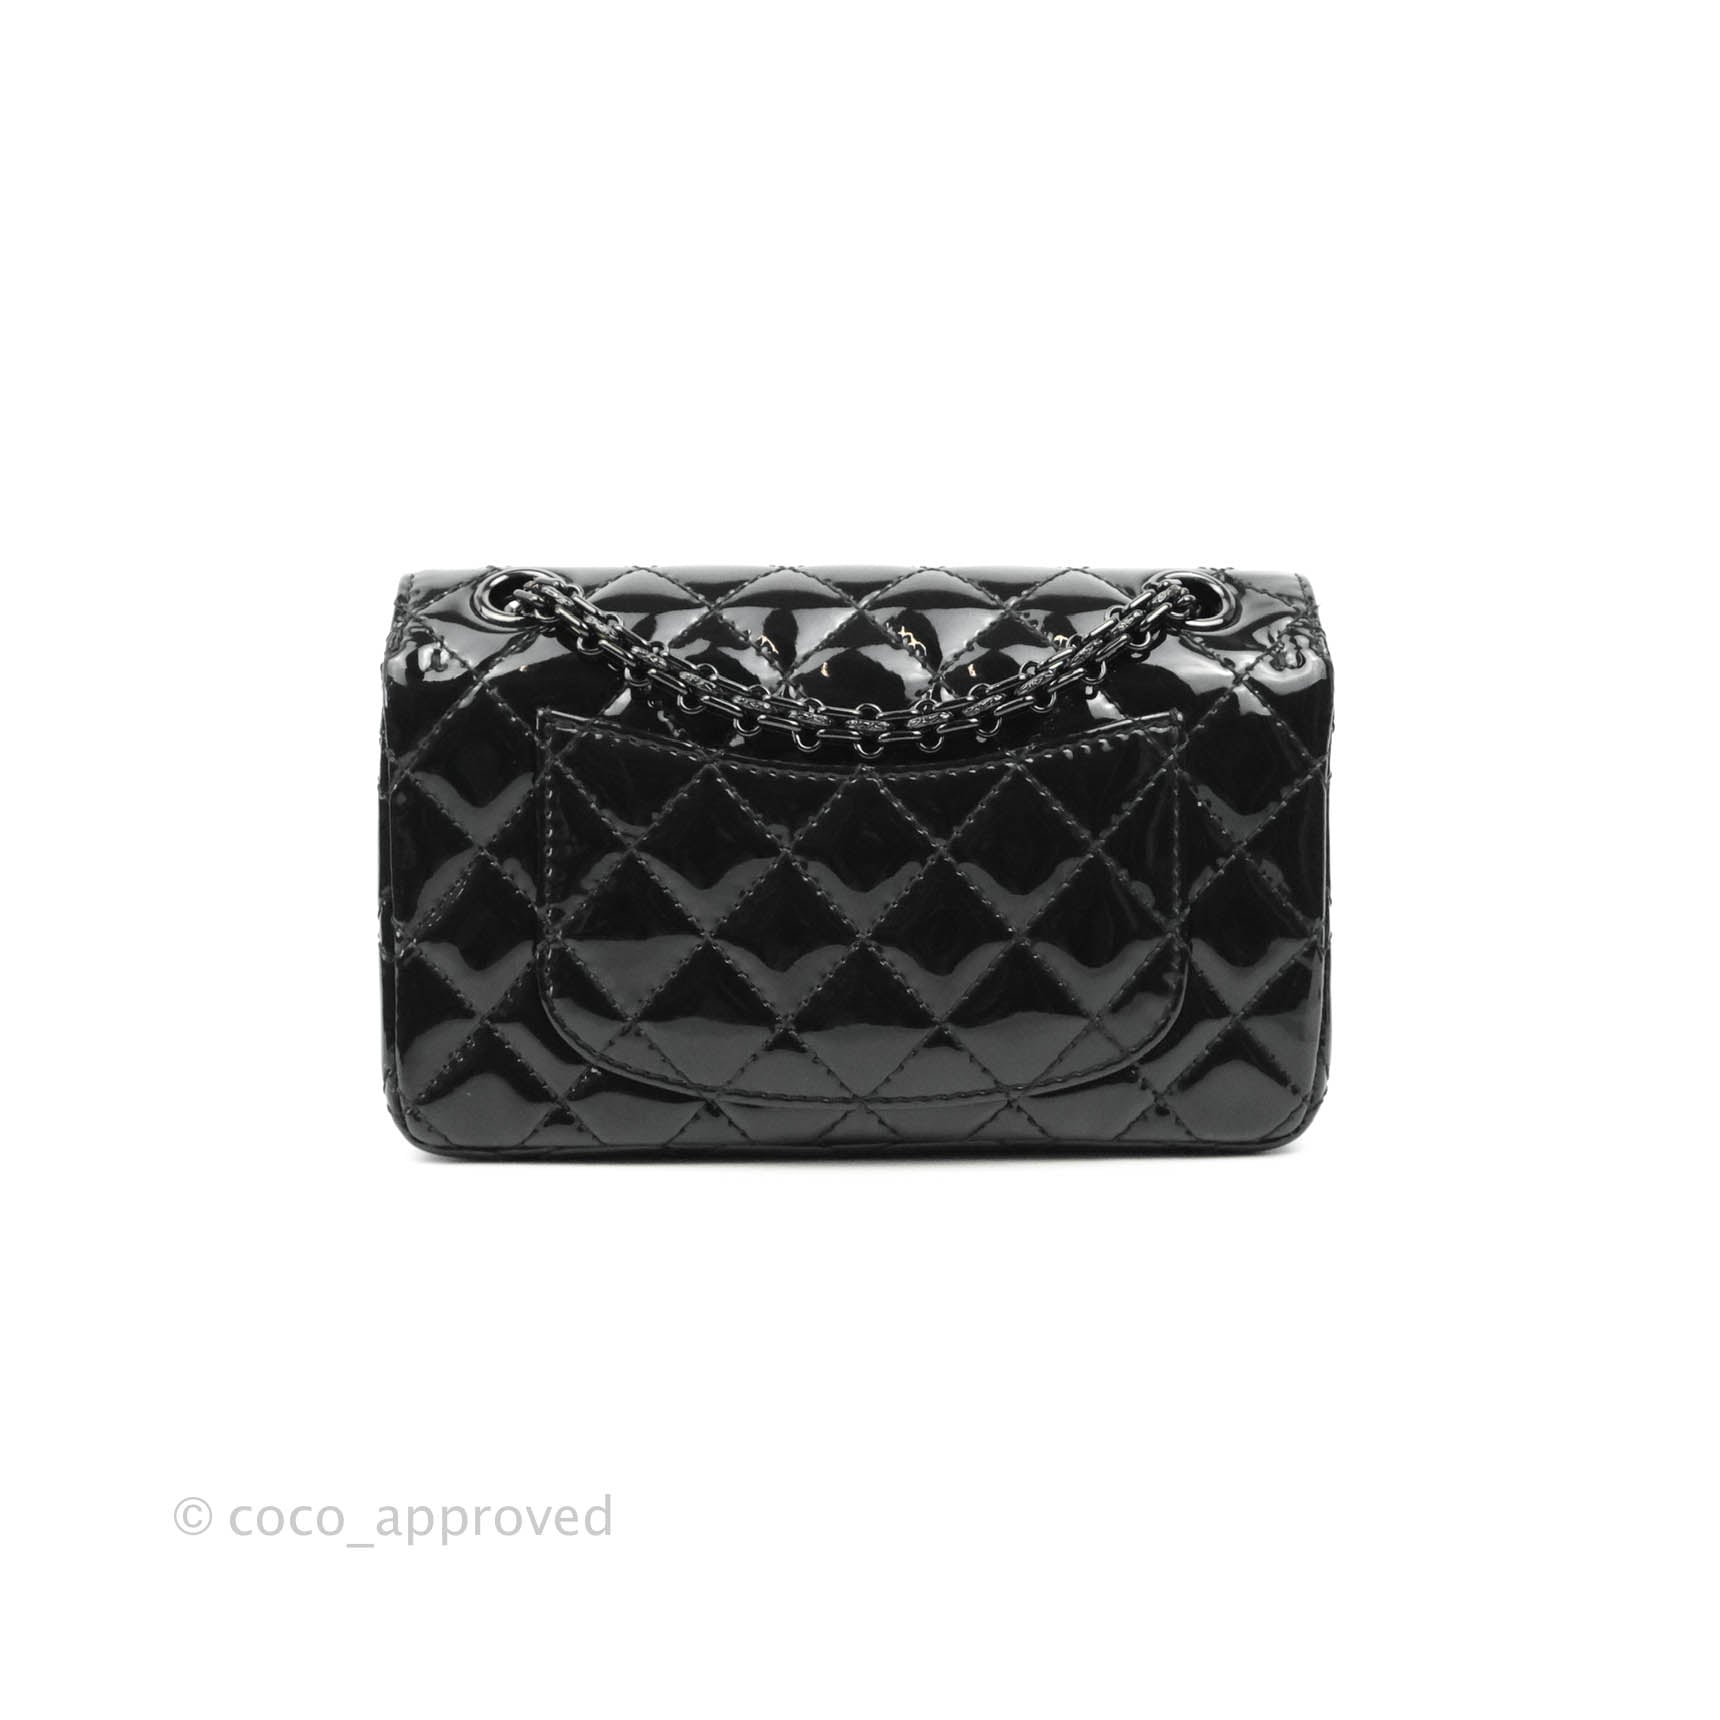 Sold at Auction: Chanel Black and White Patent Quilted Leather